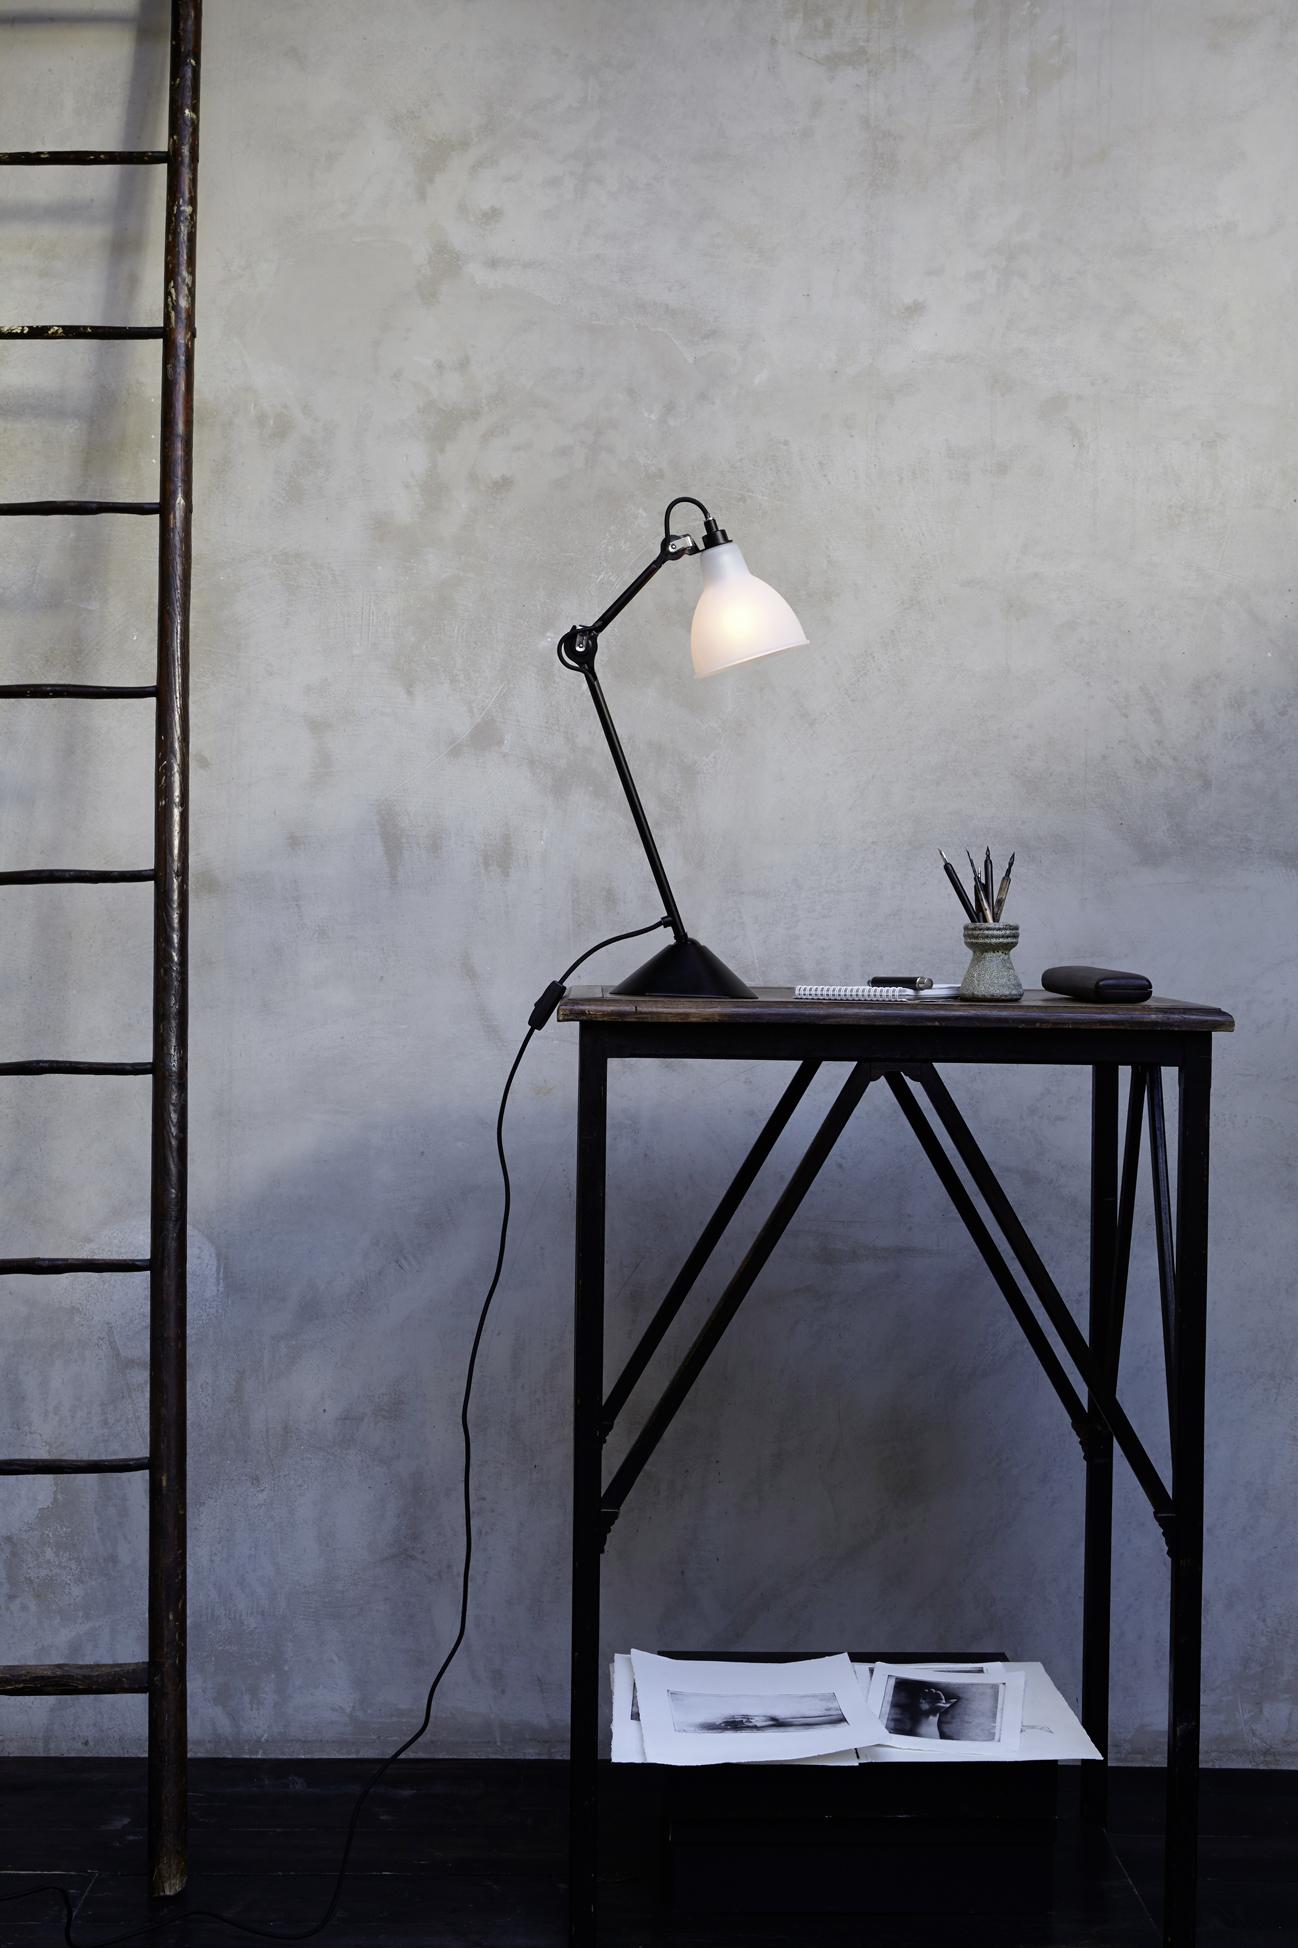 Polycarbonate lampe Gras N° 205 table lamp by Bernard-Albin Gras
Dimensions: D 17.5 x W 14 x H 39 cm
Materials: Steel, Polycarbonate
Also available: Different colors and other shade available.

All our lamps can be wired according to each